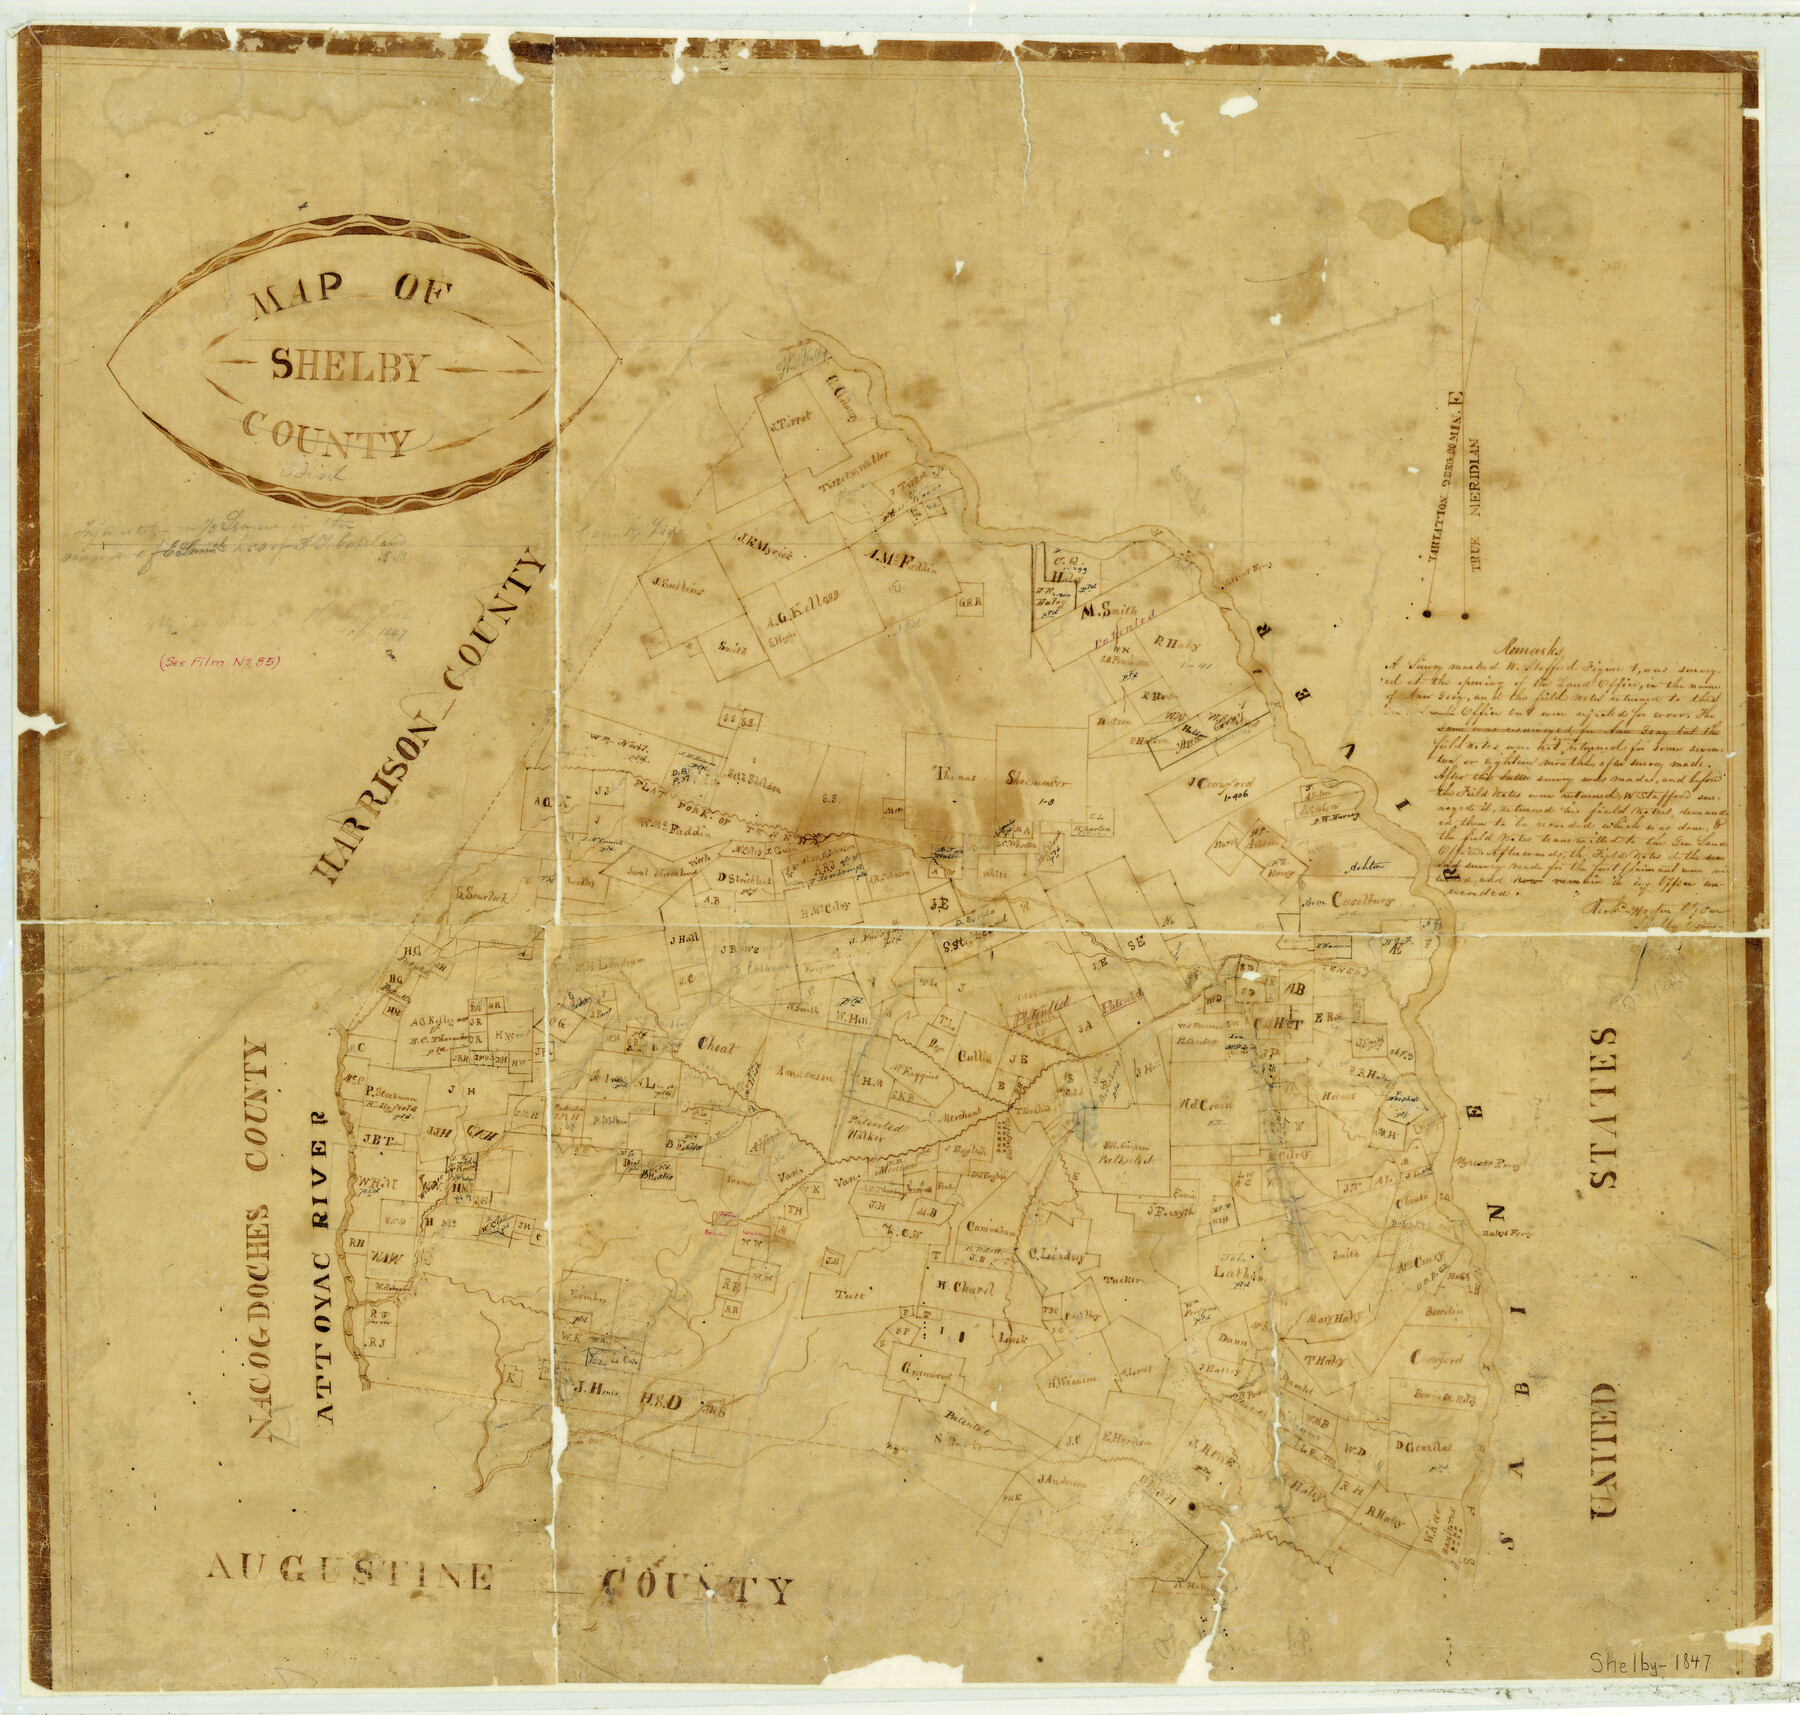 4032, Map of Shelby County, General Map Collection